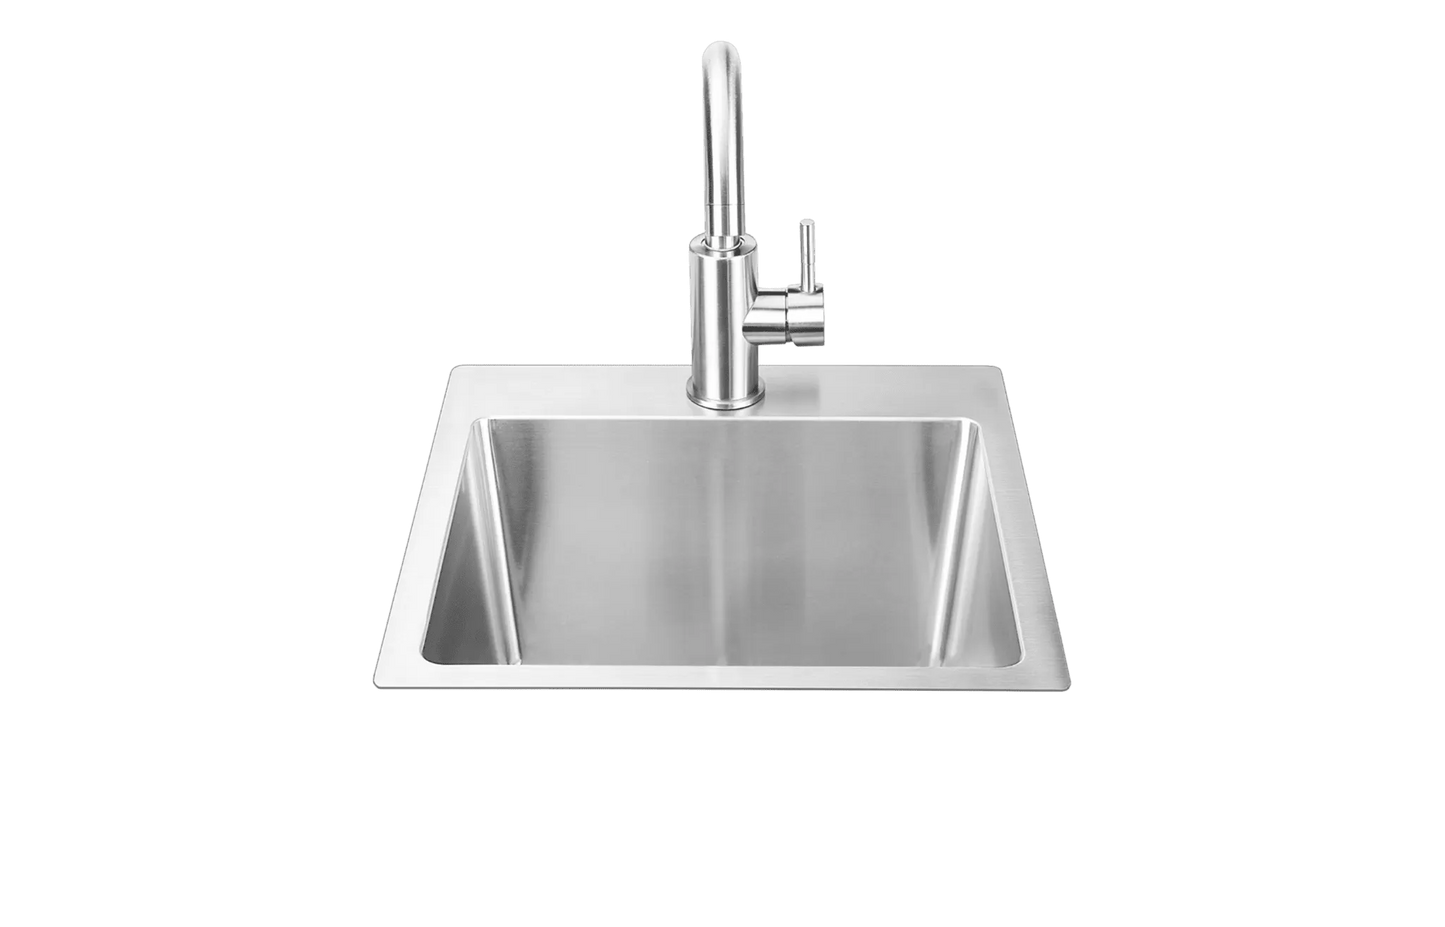 Bull - Large SS Sink & faucet  Under & Over Mount - All In one Kit